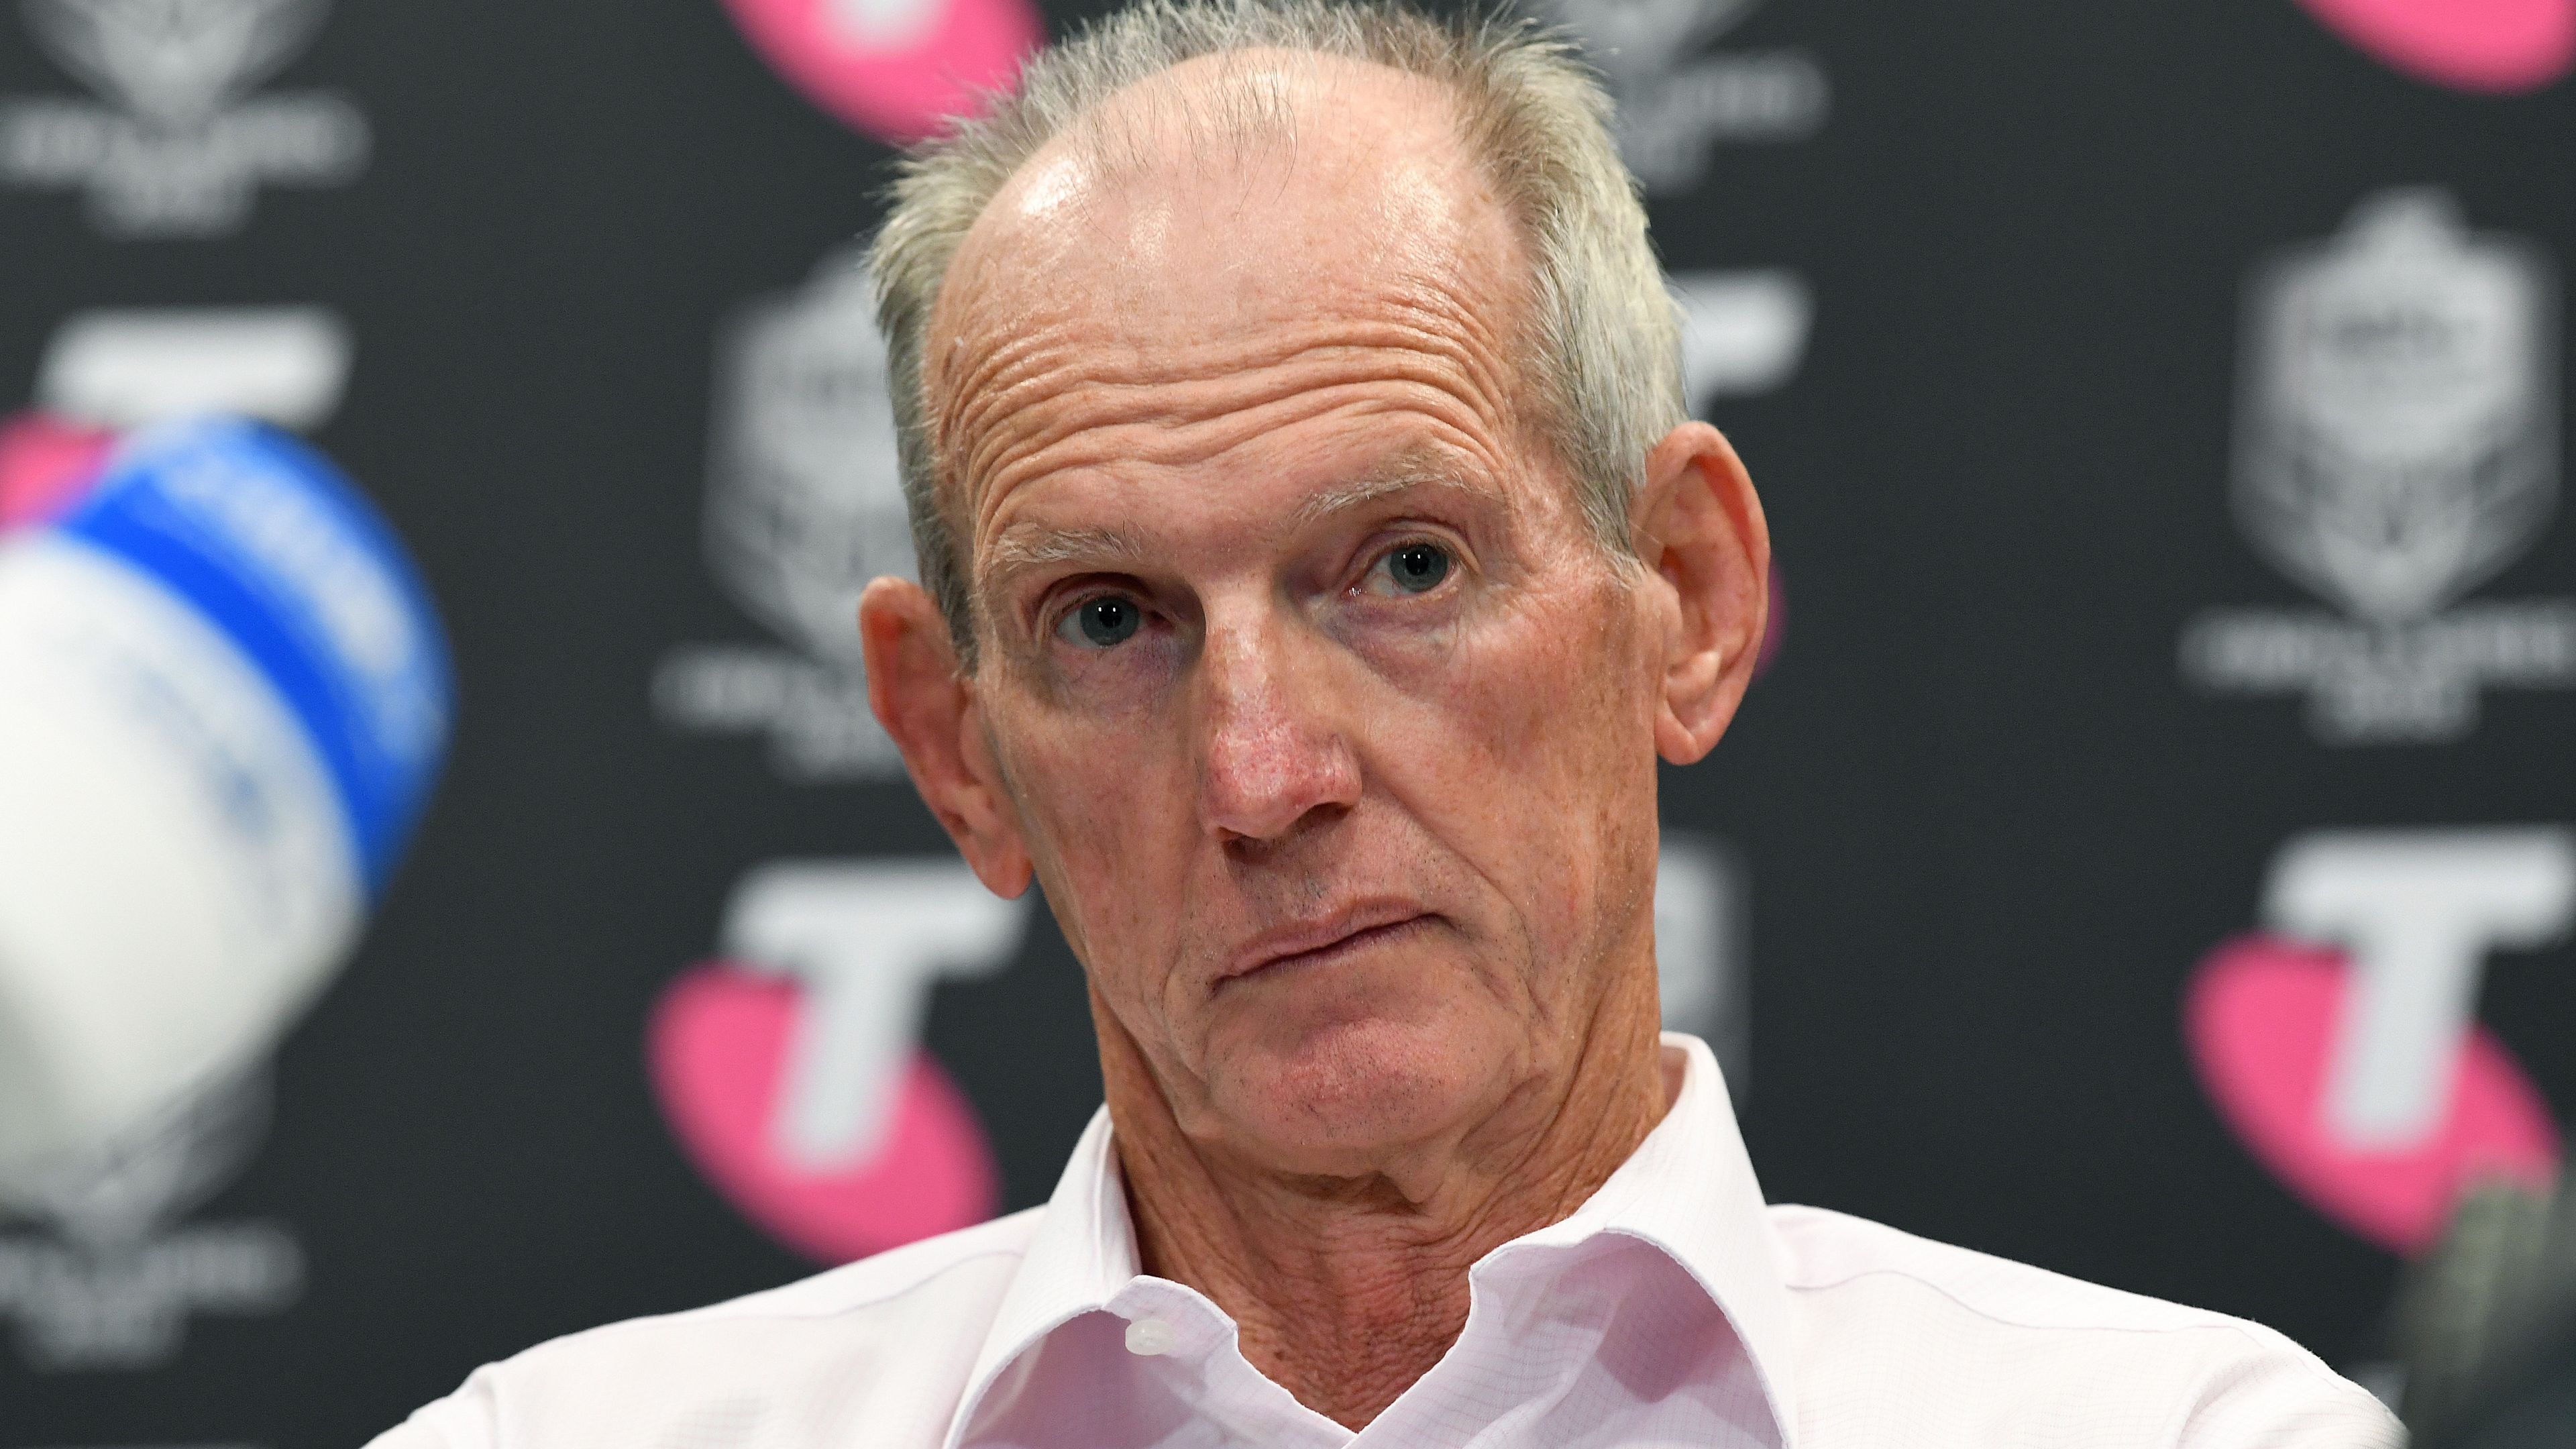 Brisbane coach Wayne Bennett to carry on as usual at Broncos